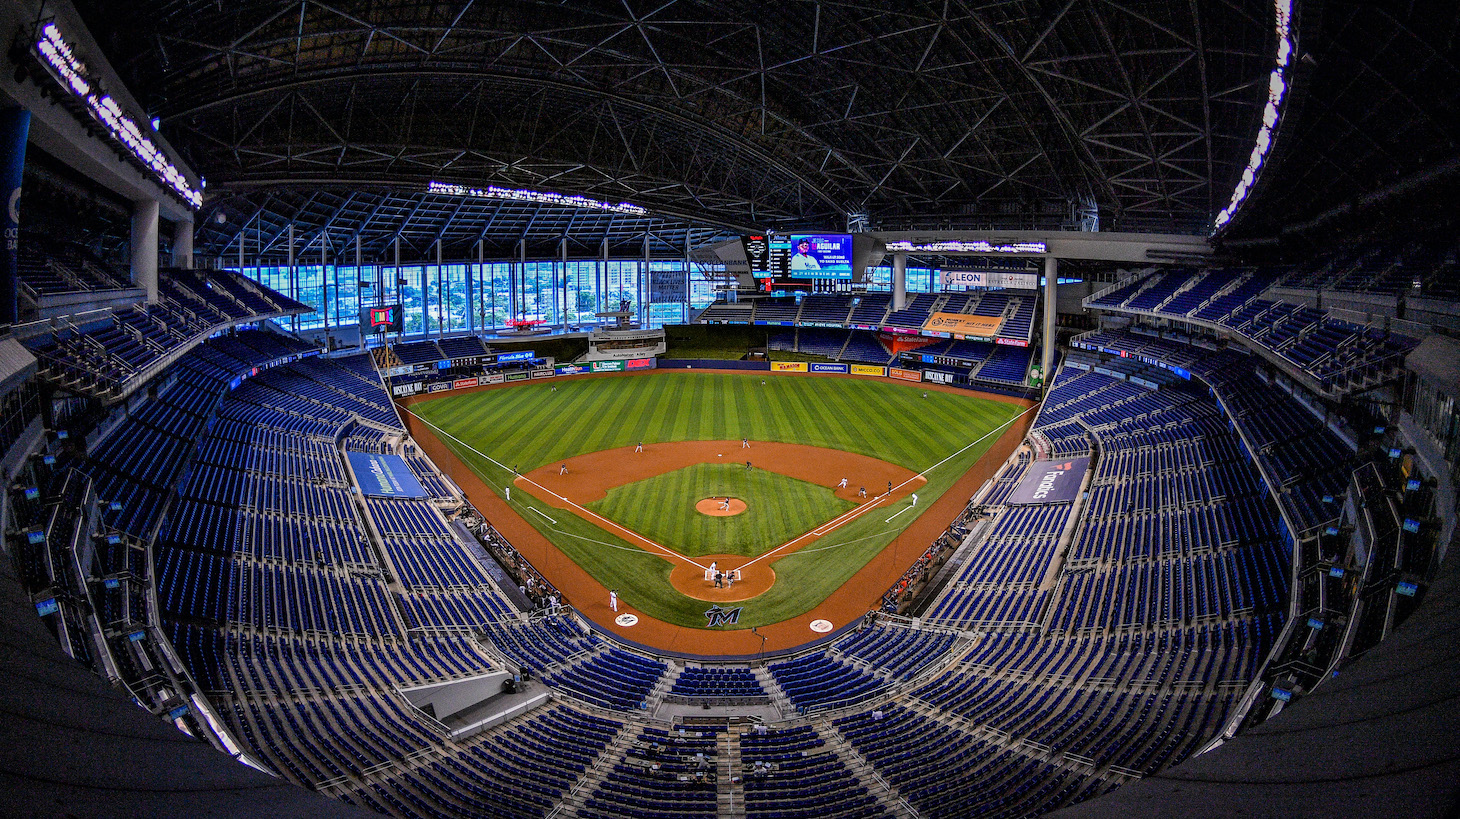 MIAMI, FLORIDA - SEPTEMBER 20: A general view of the field prior to the game between the Miami Marlins and the Washington Nationals at Marlins Park on September 20, 2020 in Miami, Florida. (Photo by Mark Brown/Getty Images)